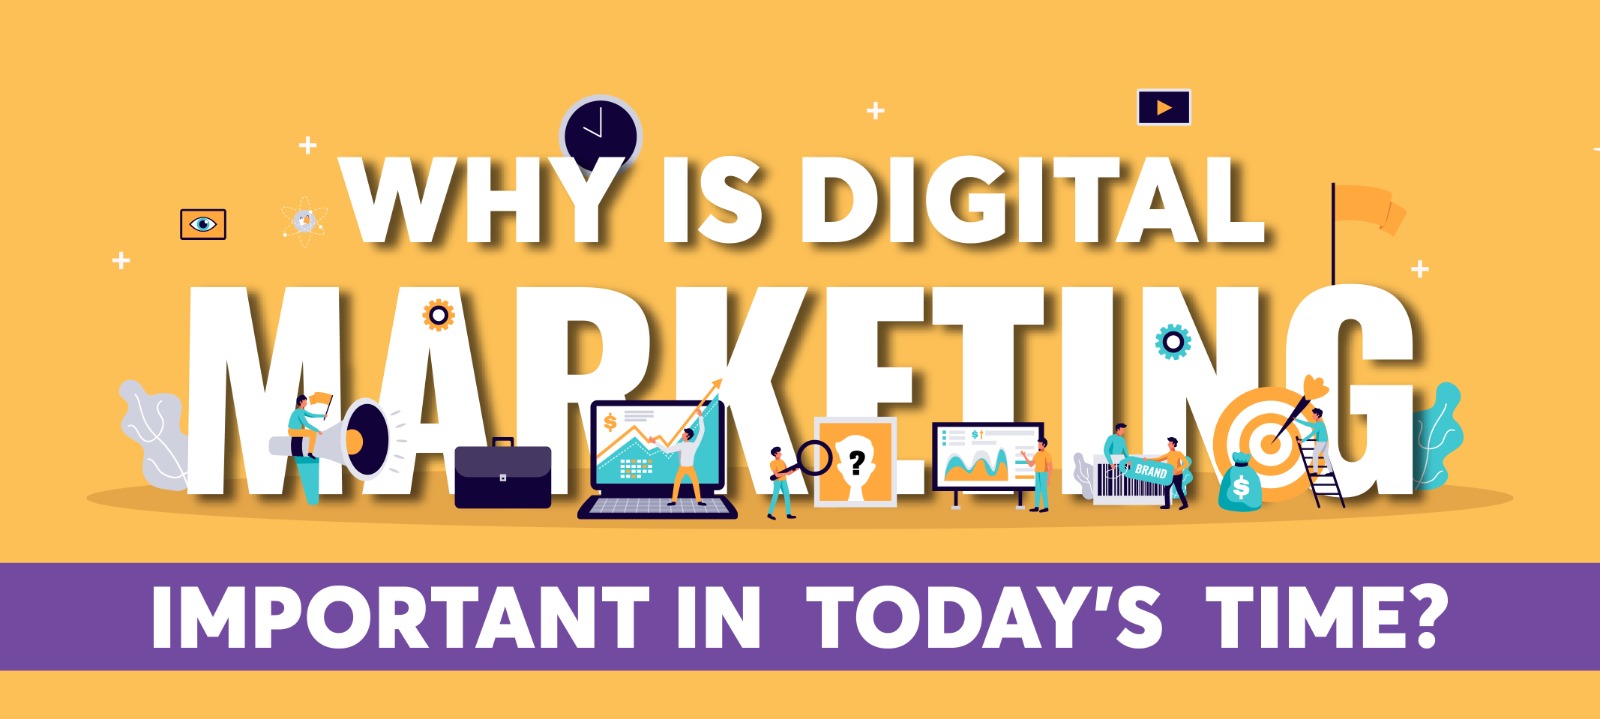 Why Is Digital Marketing Important In Today's Time?